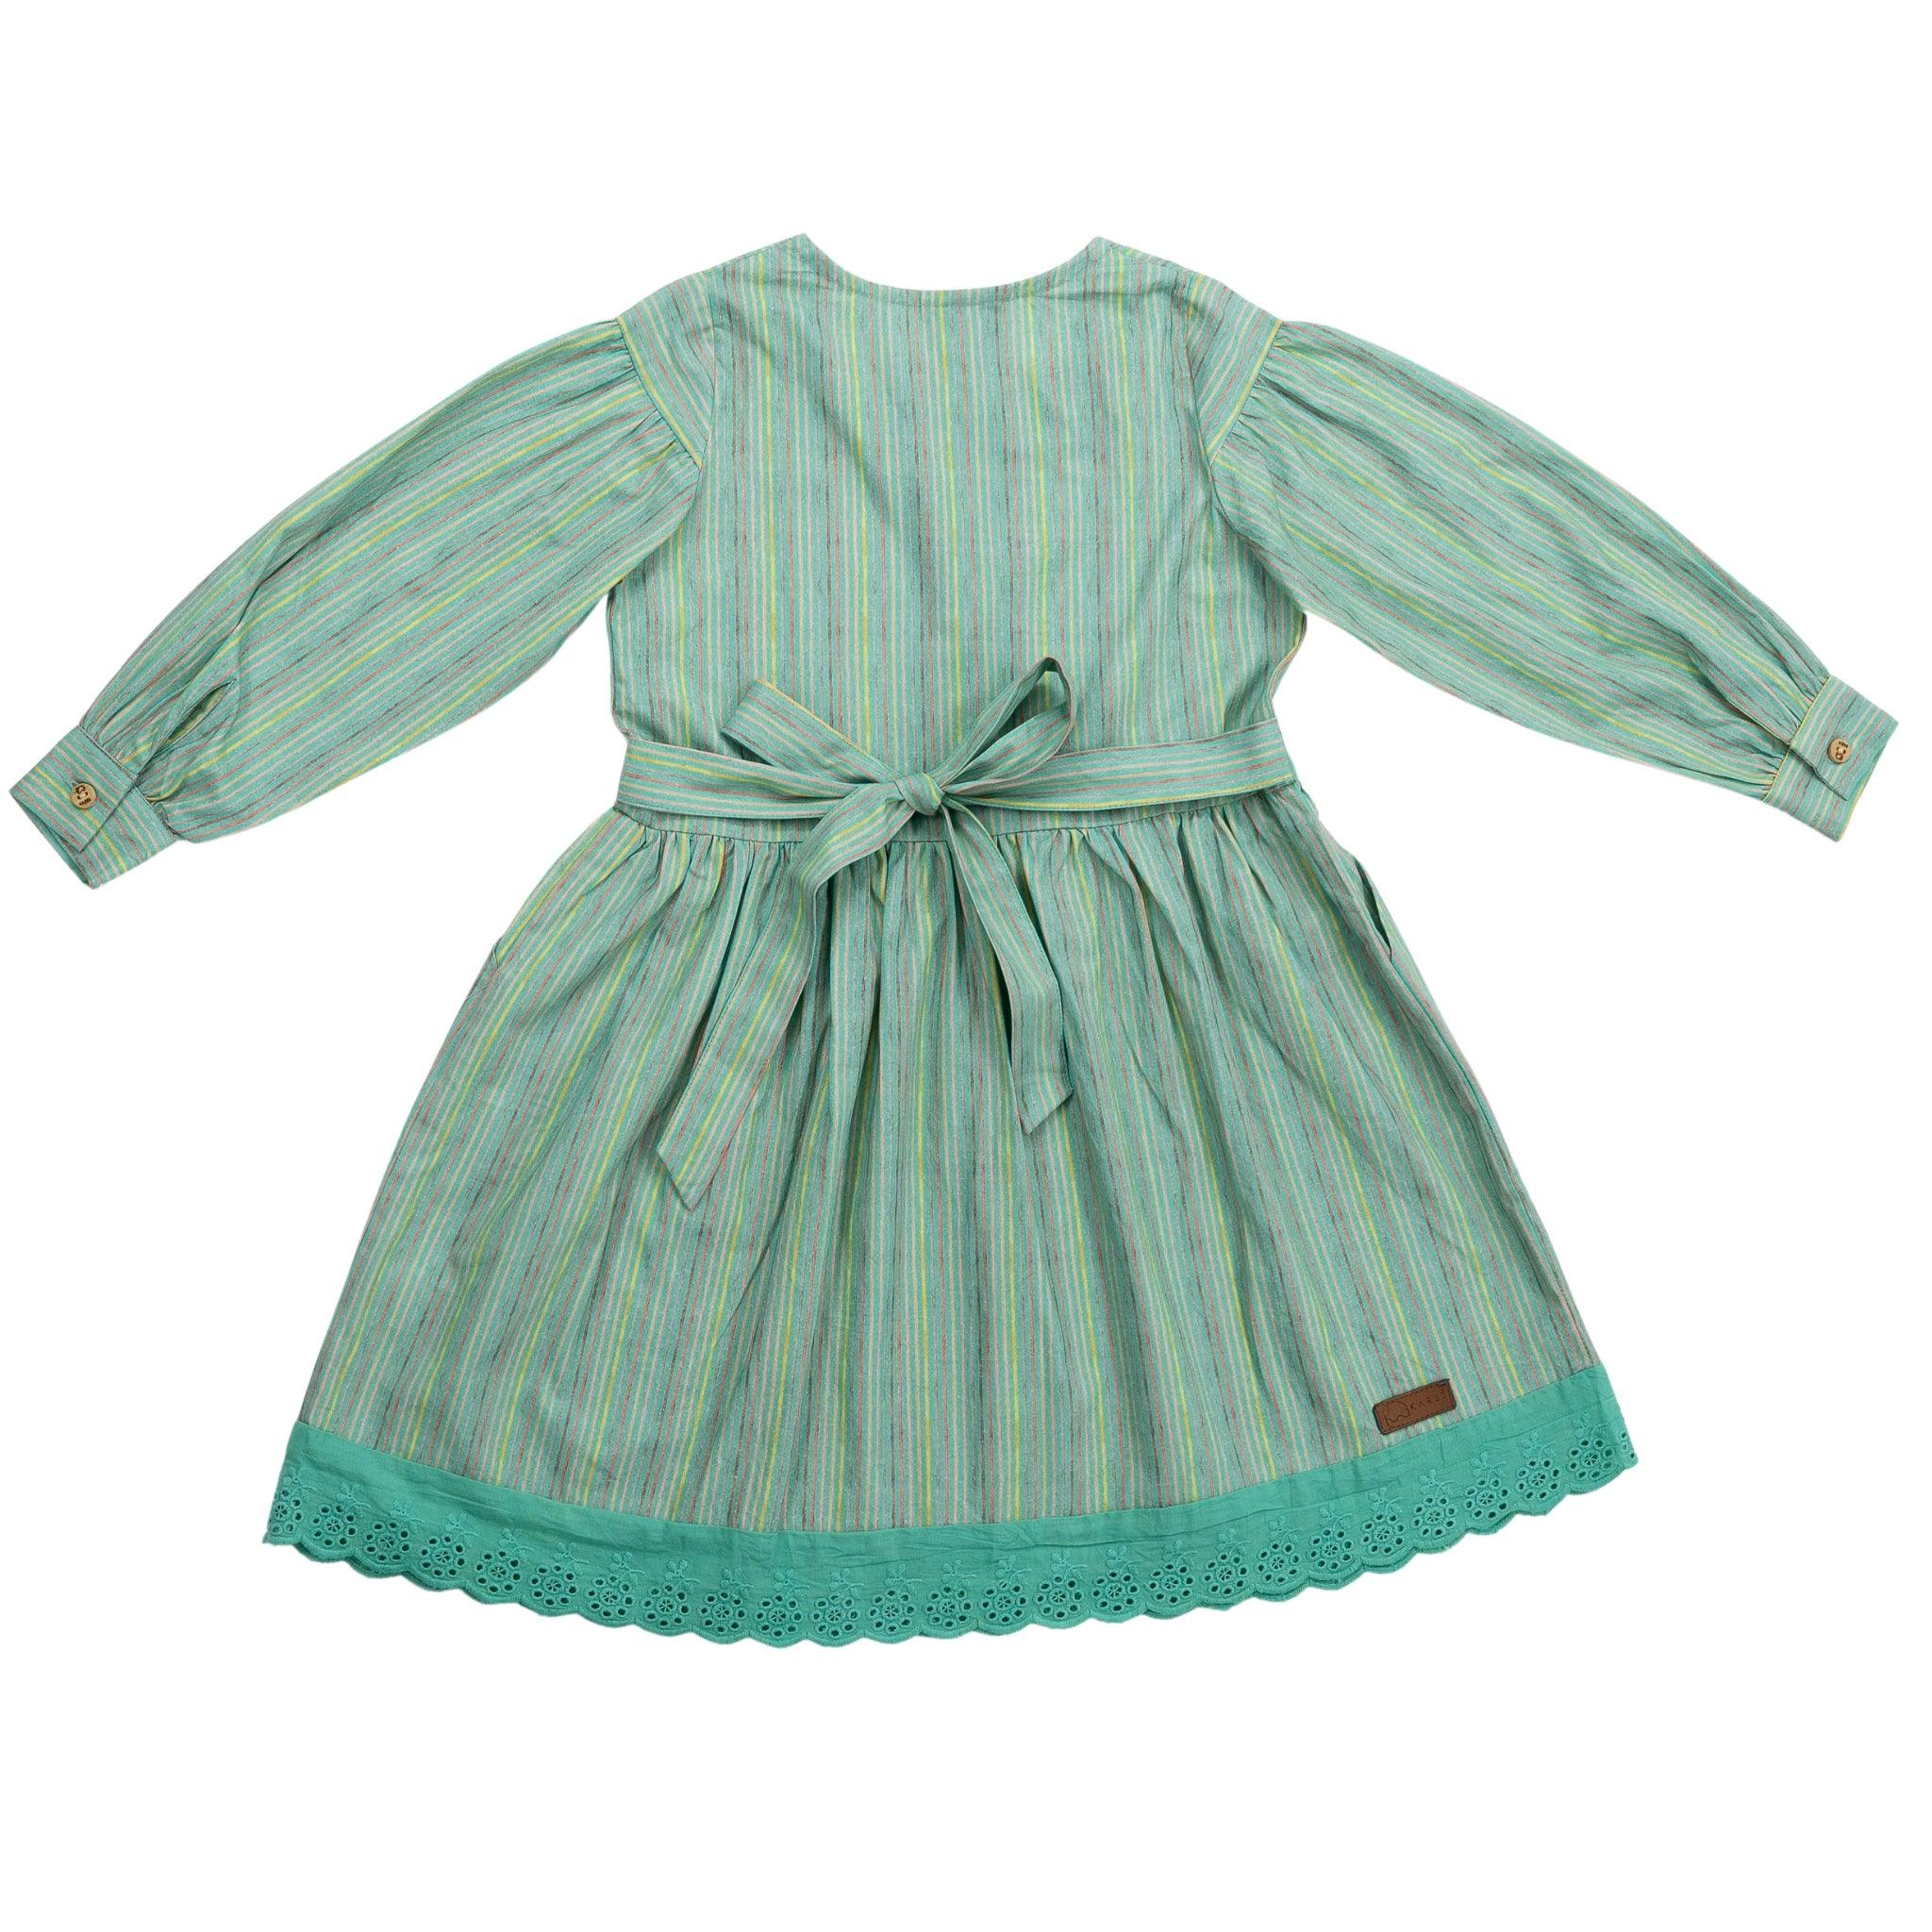 An eco-friendly Green Striped Long Puff Sleeve Cotton Dress with a bow from Karee.